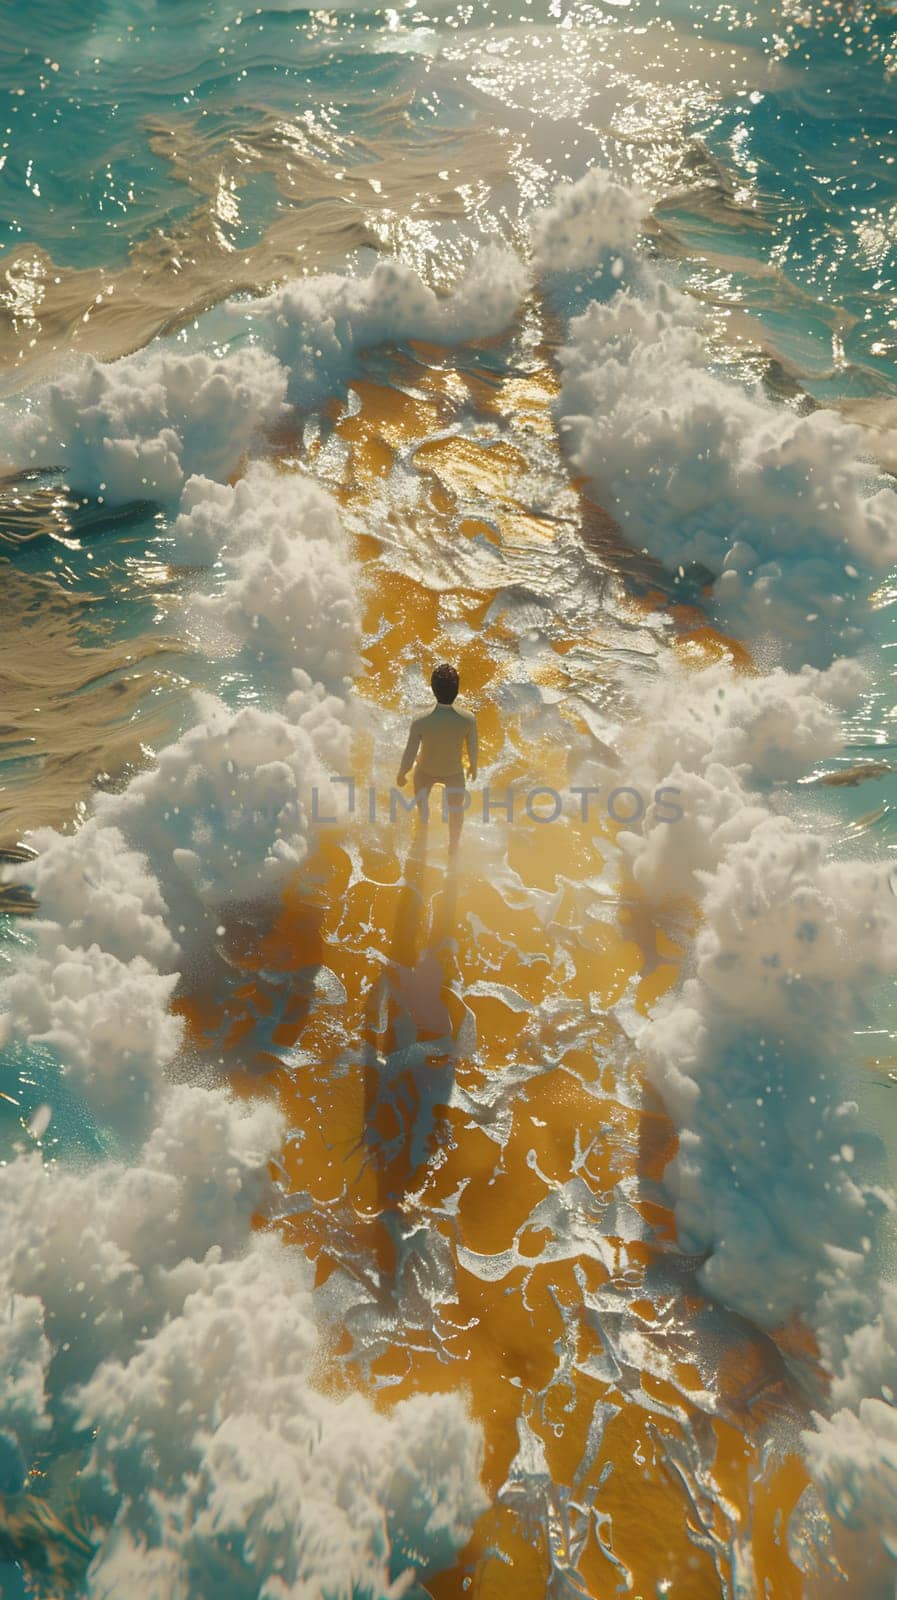 A figure balancing on a surfboard in the fluid landscape of the ocean, creating a scene reminiscent of a painting in marine biology